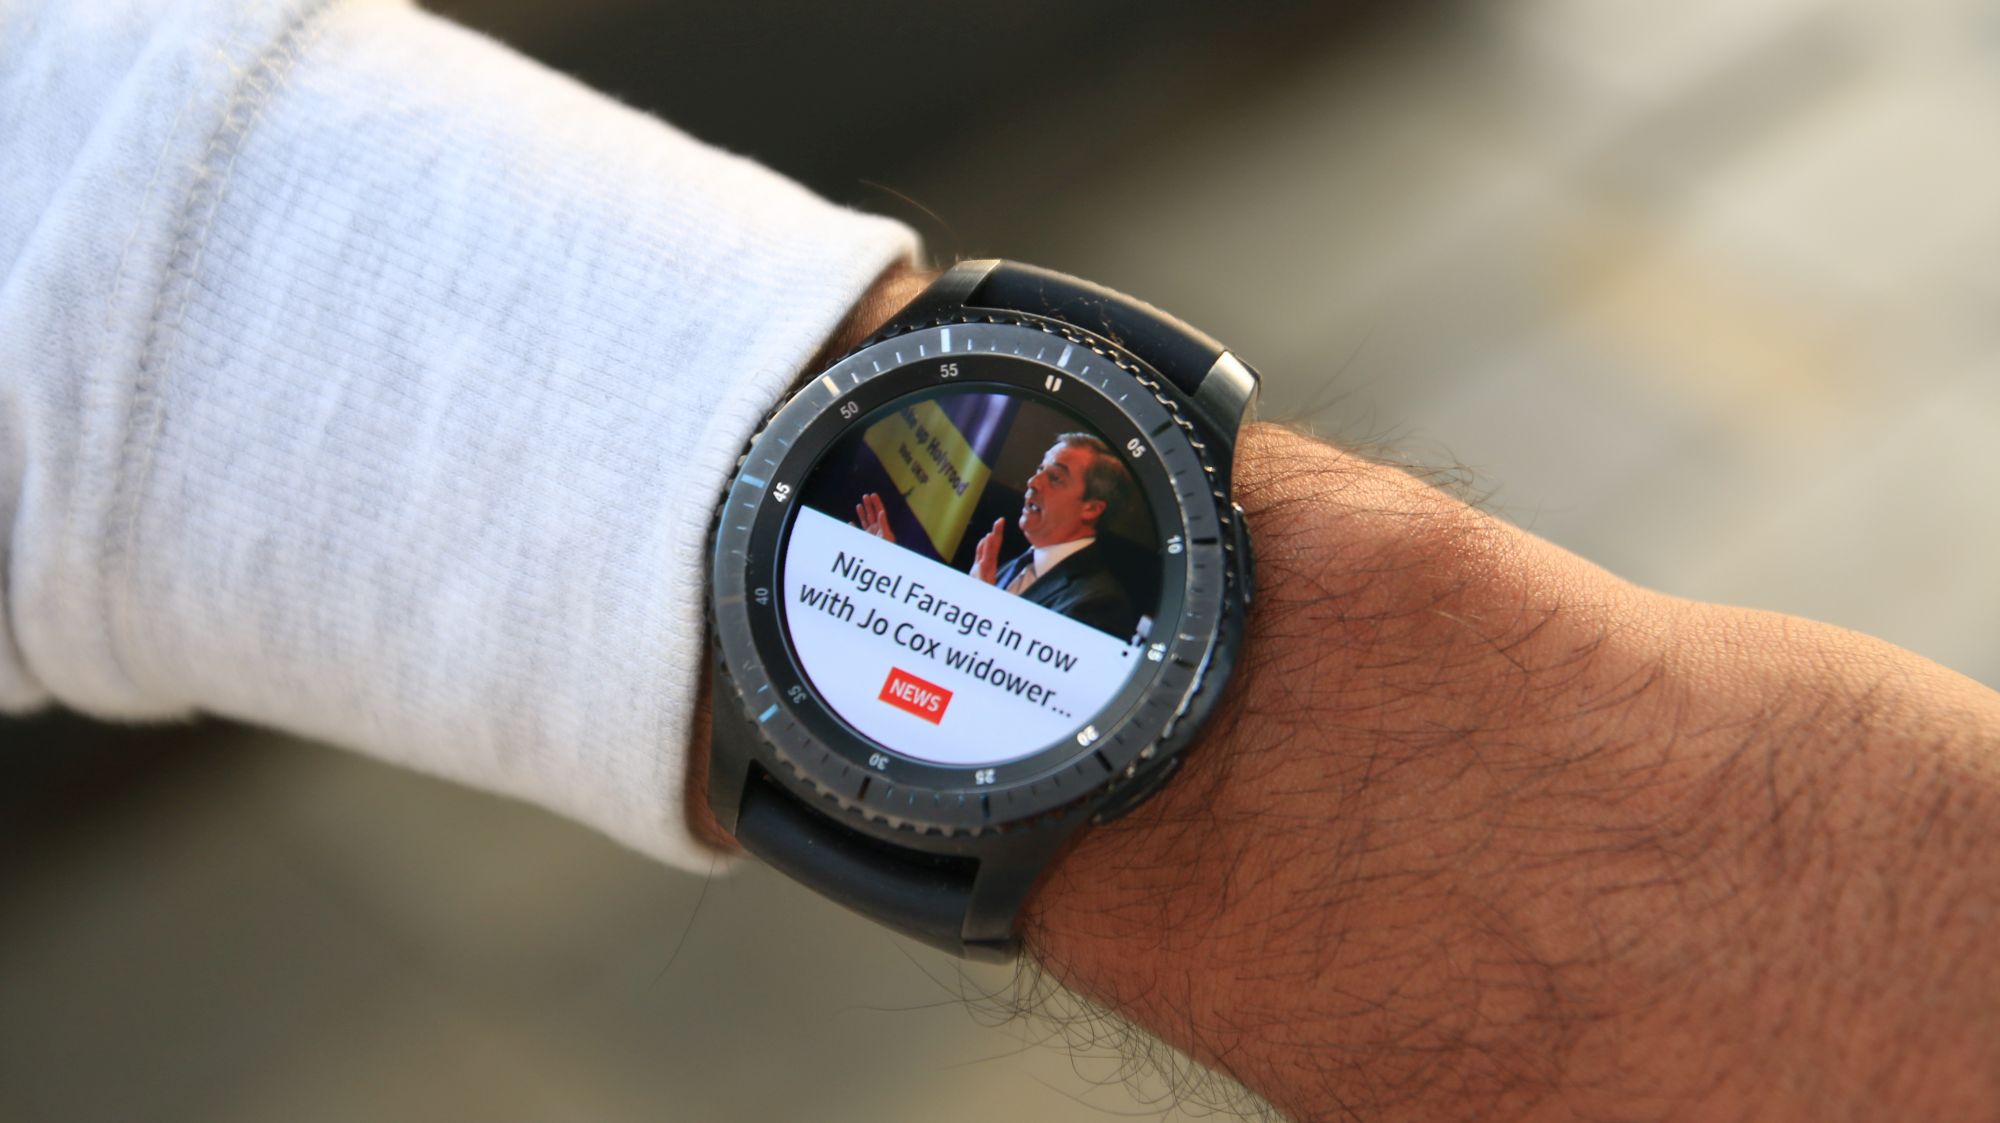 connect samsung gear s3 to iphone